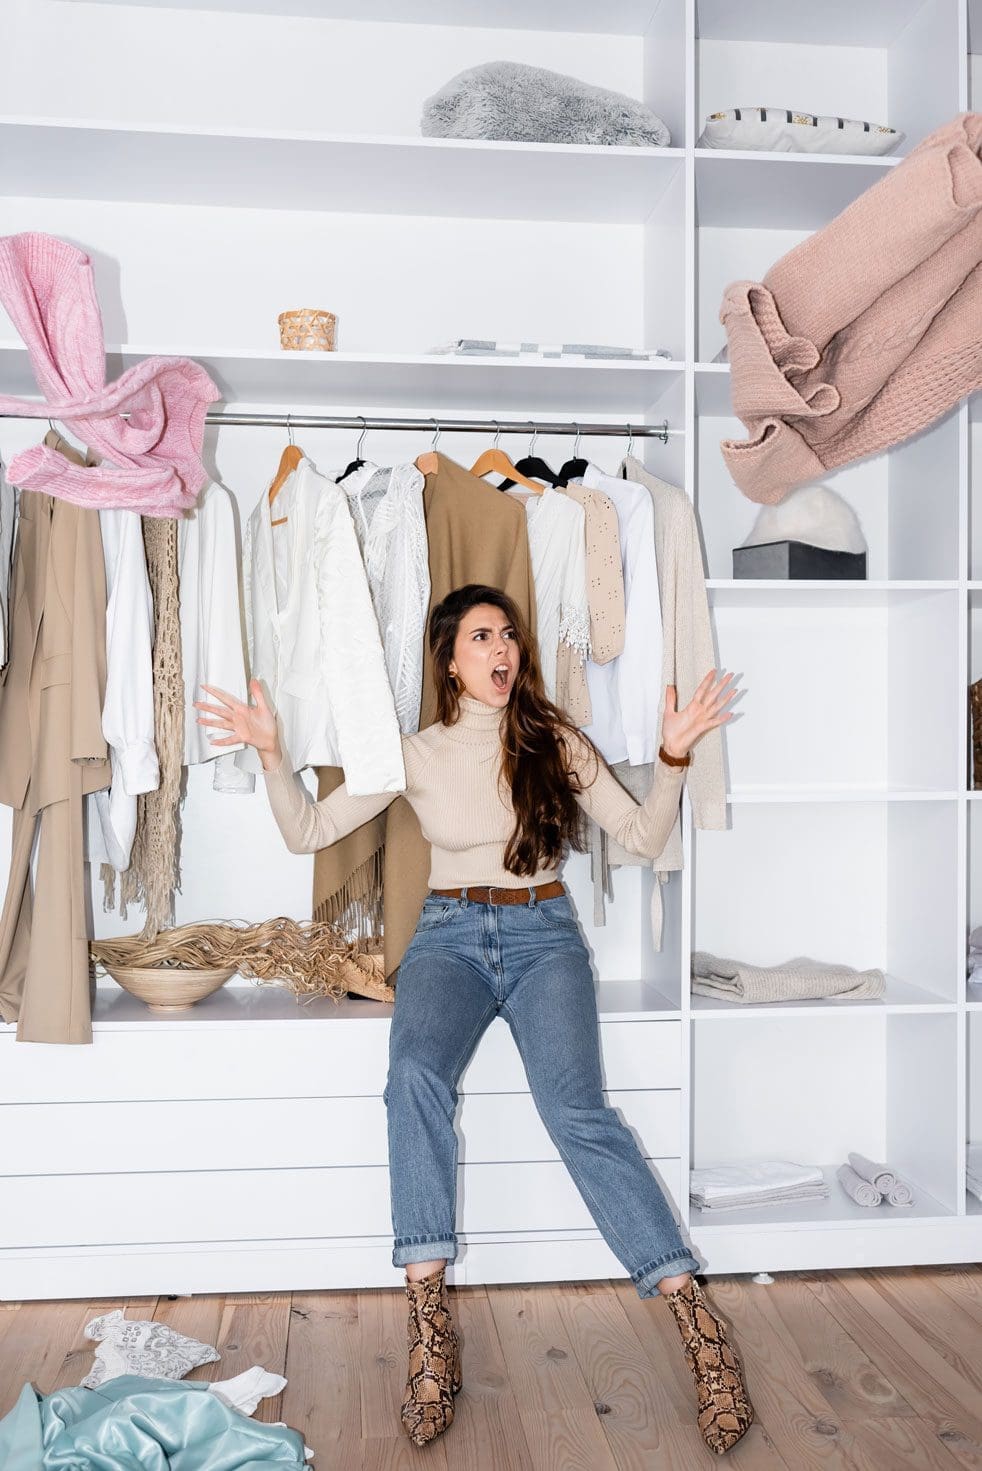 Do you have items sitting in your closet that you haven't worn for